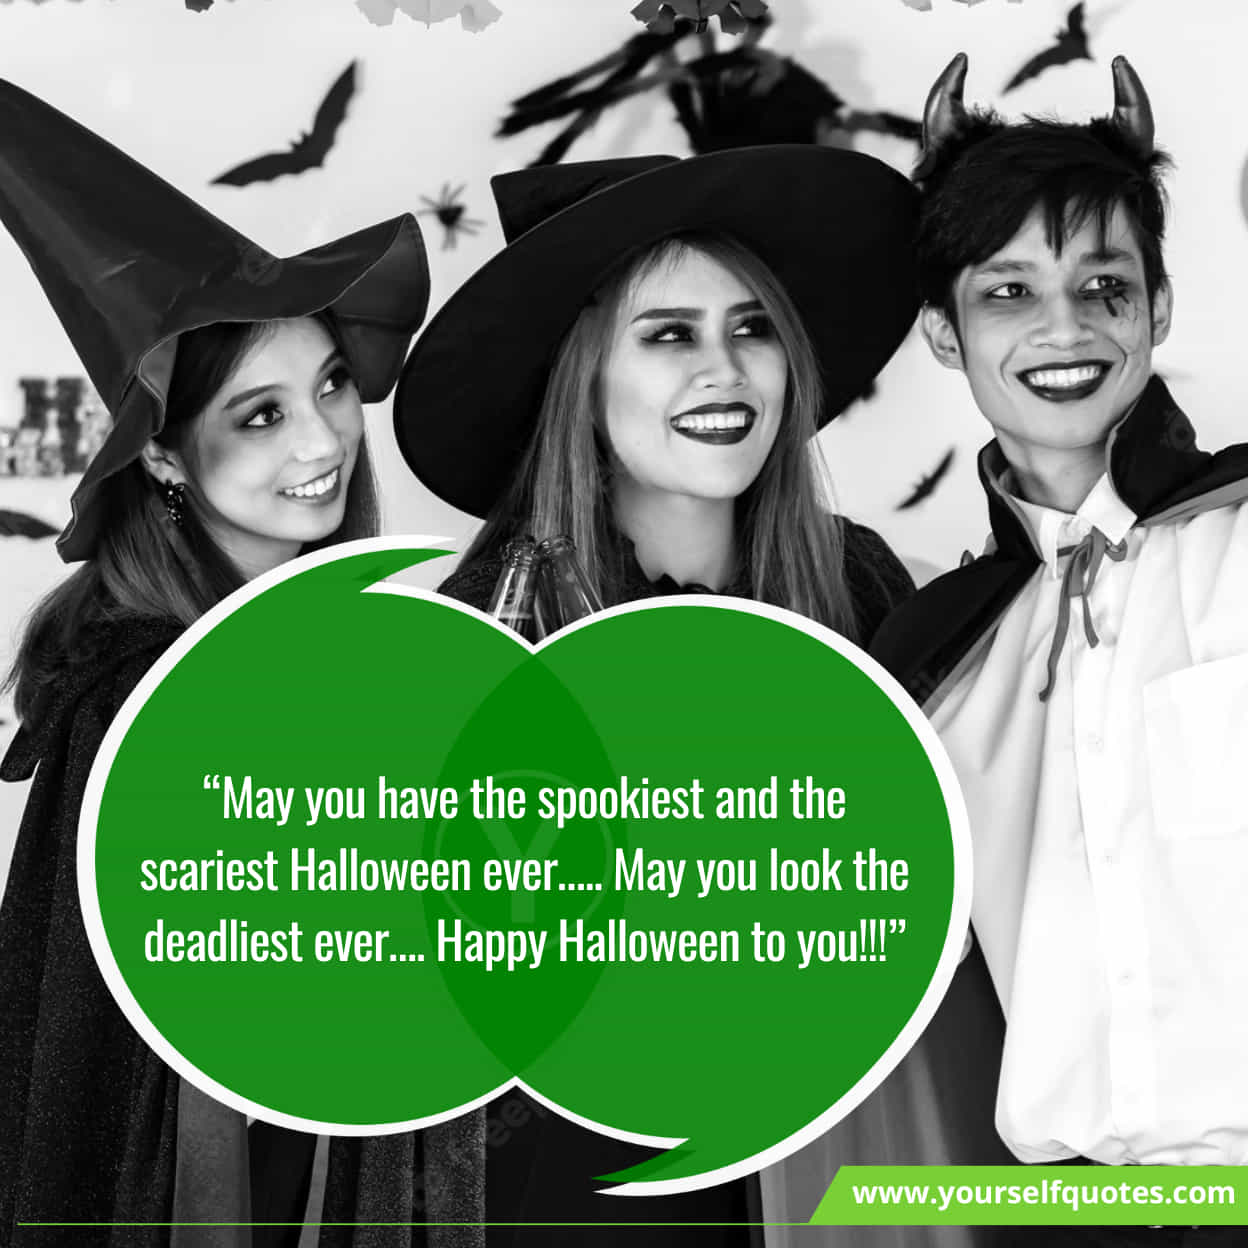 Best Enthusiastic Halloween Wishes For Friends